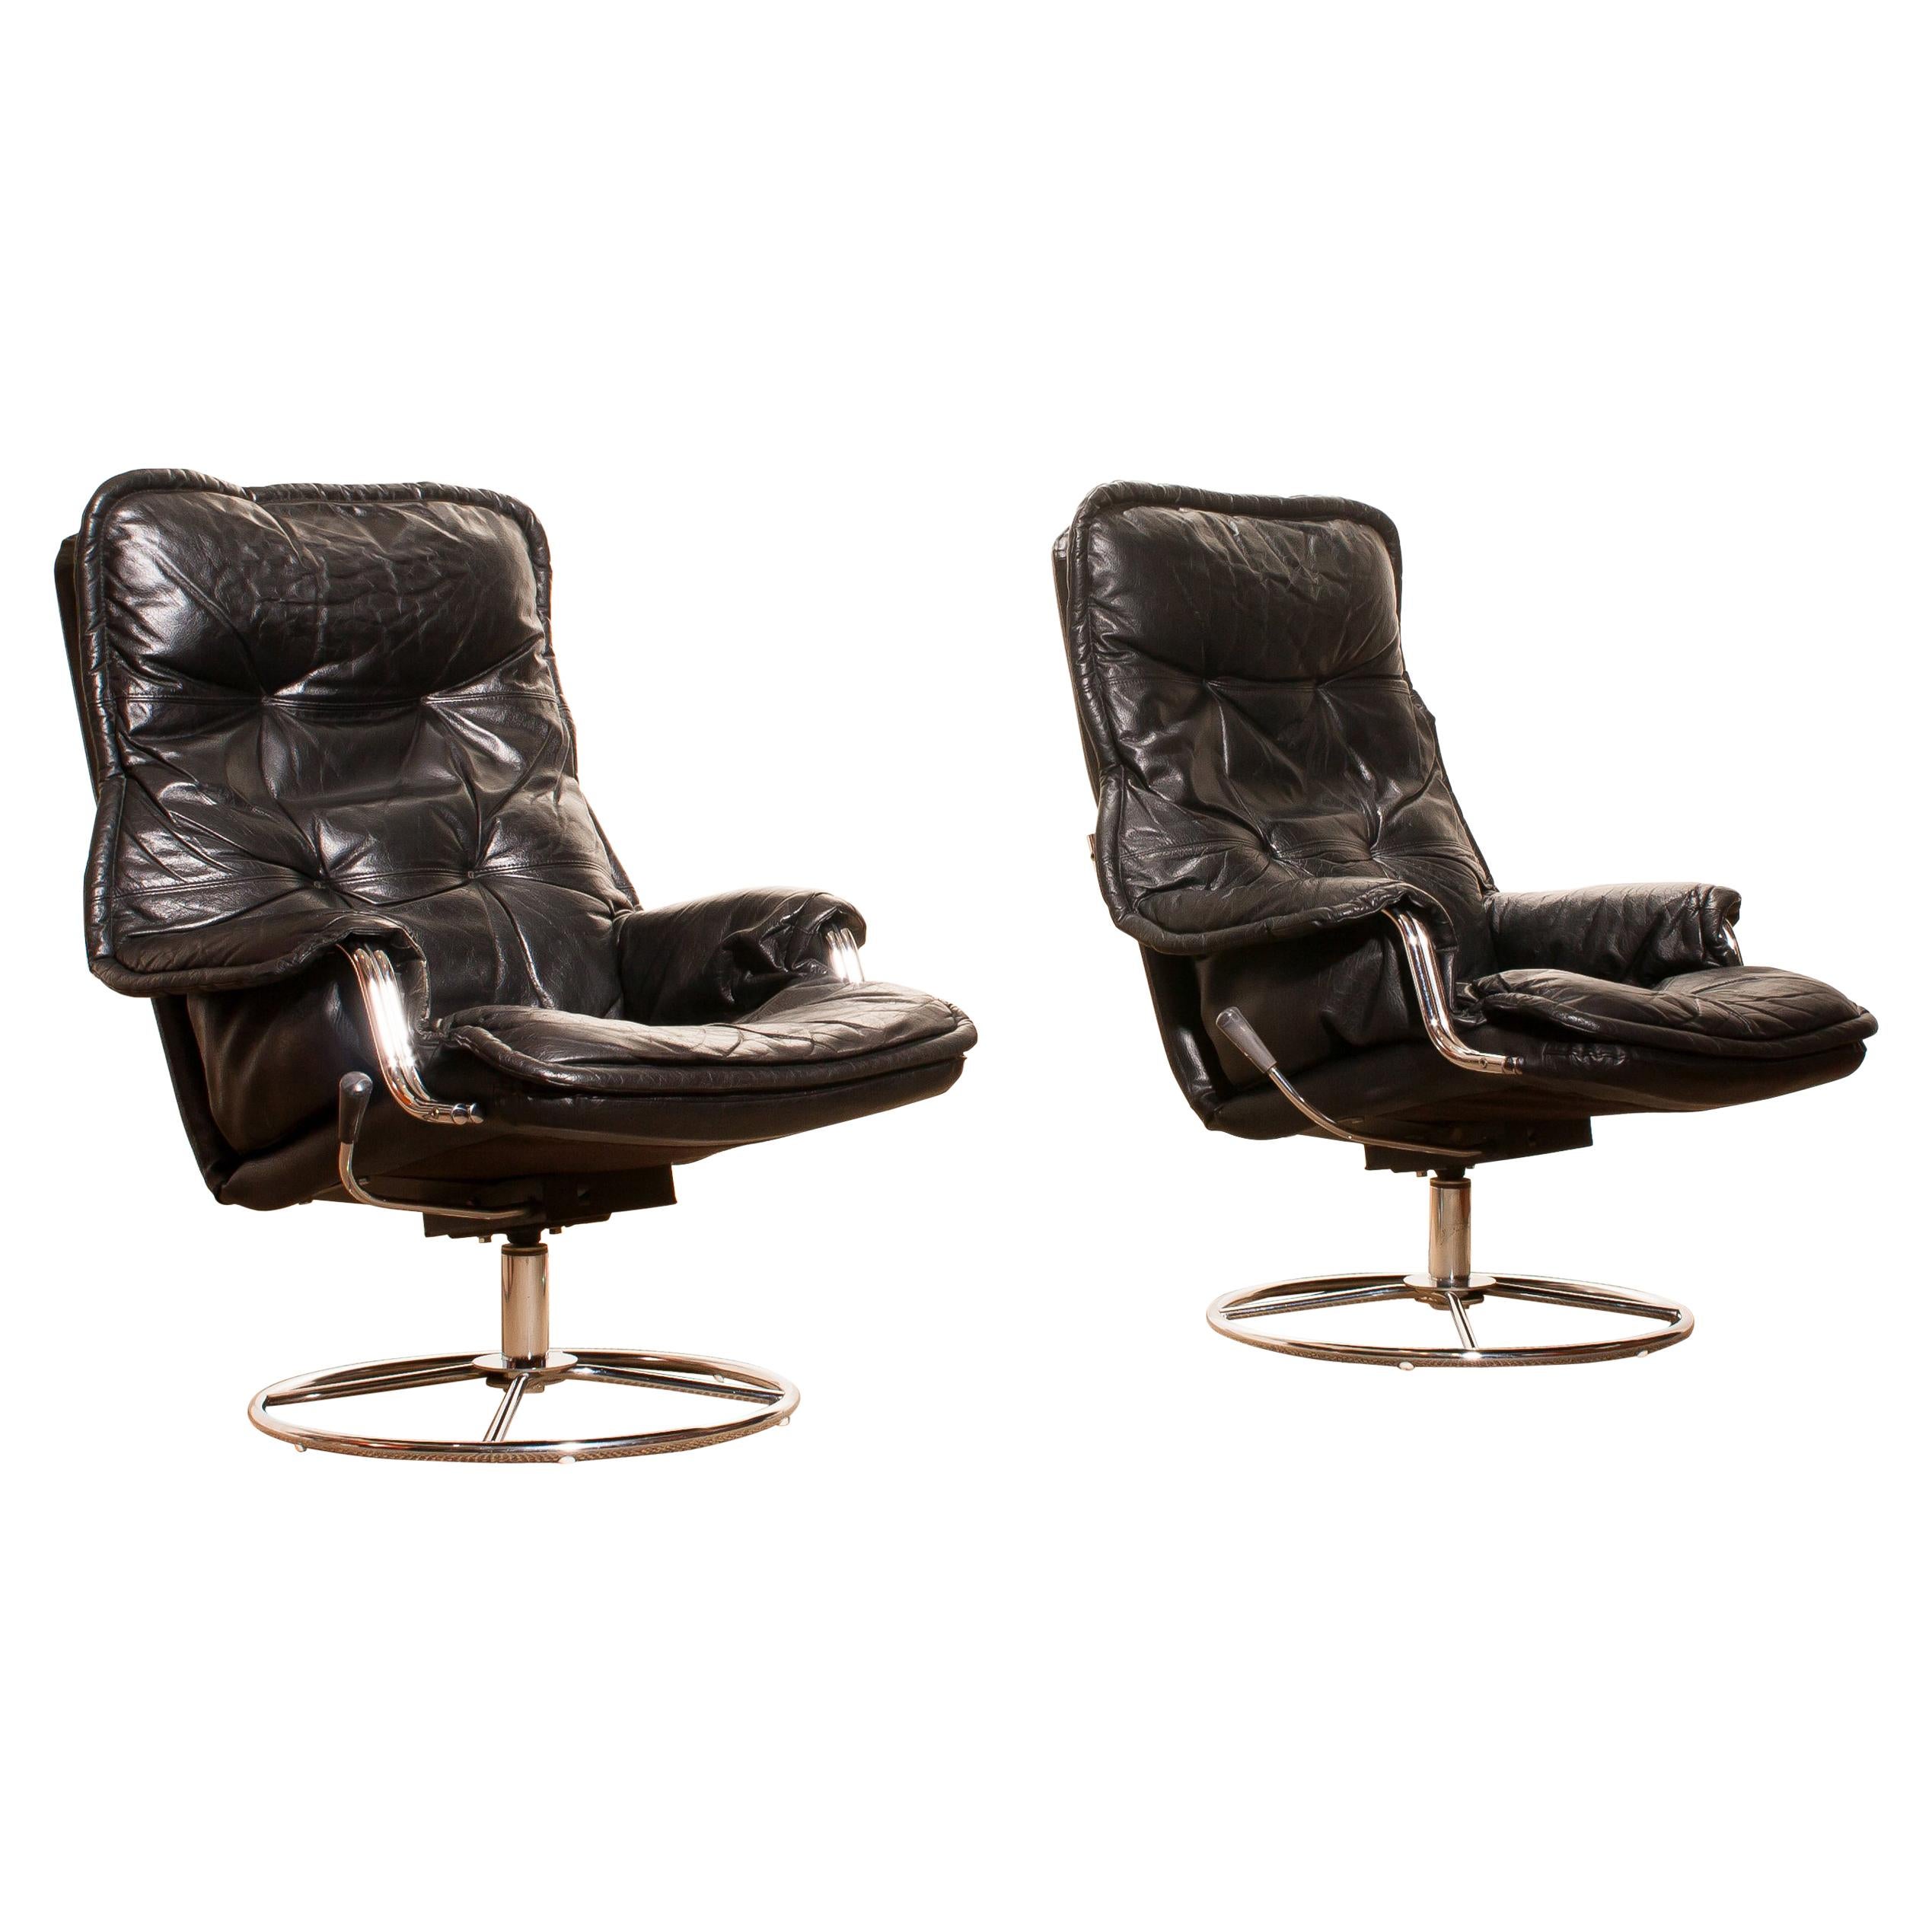 1970s Pair of Black Leather Swivel Chrome Steel Lounge Chairs, Sweden